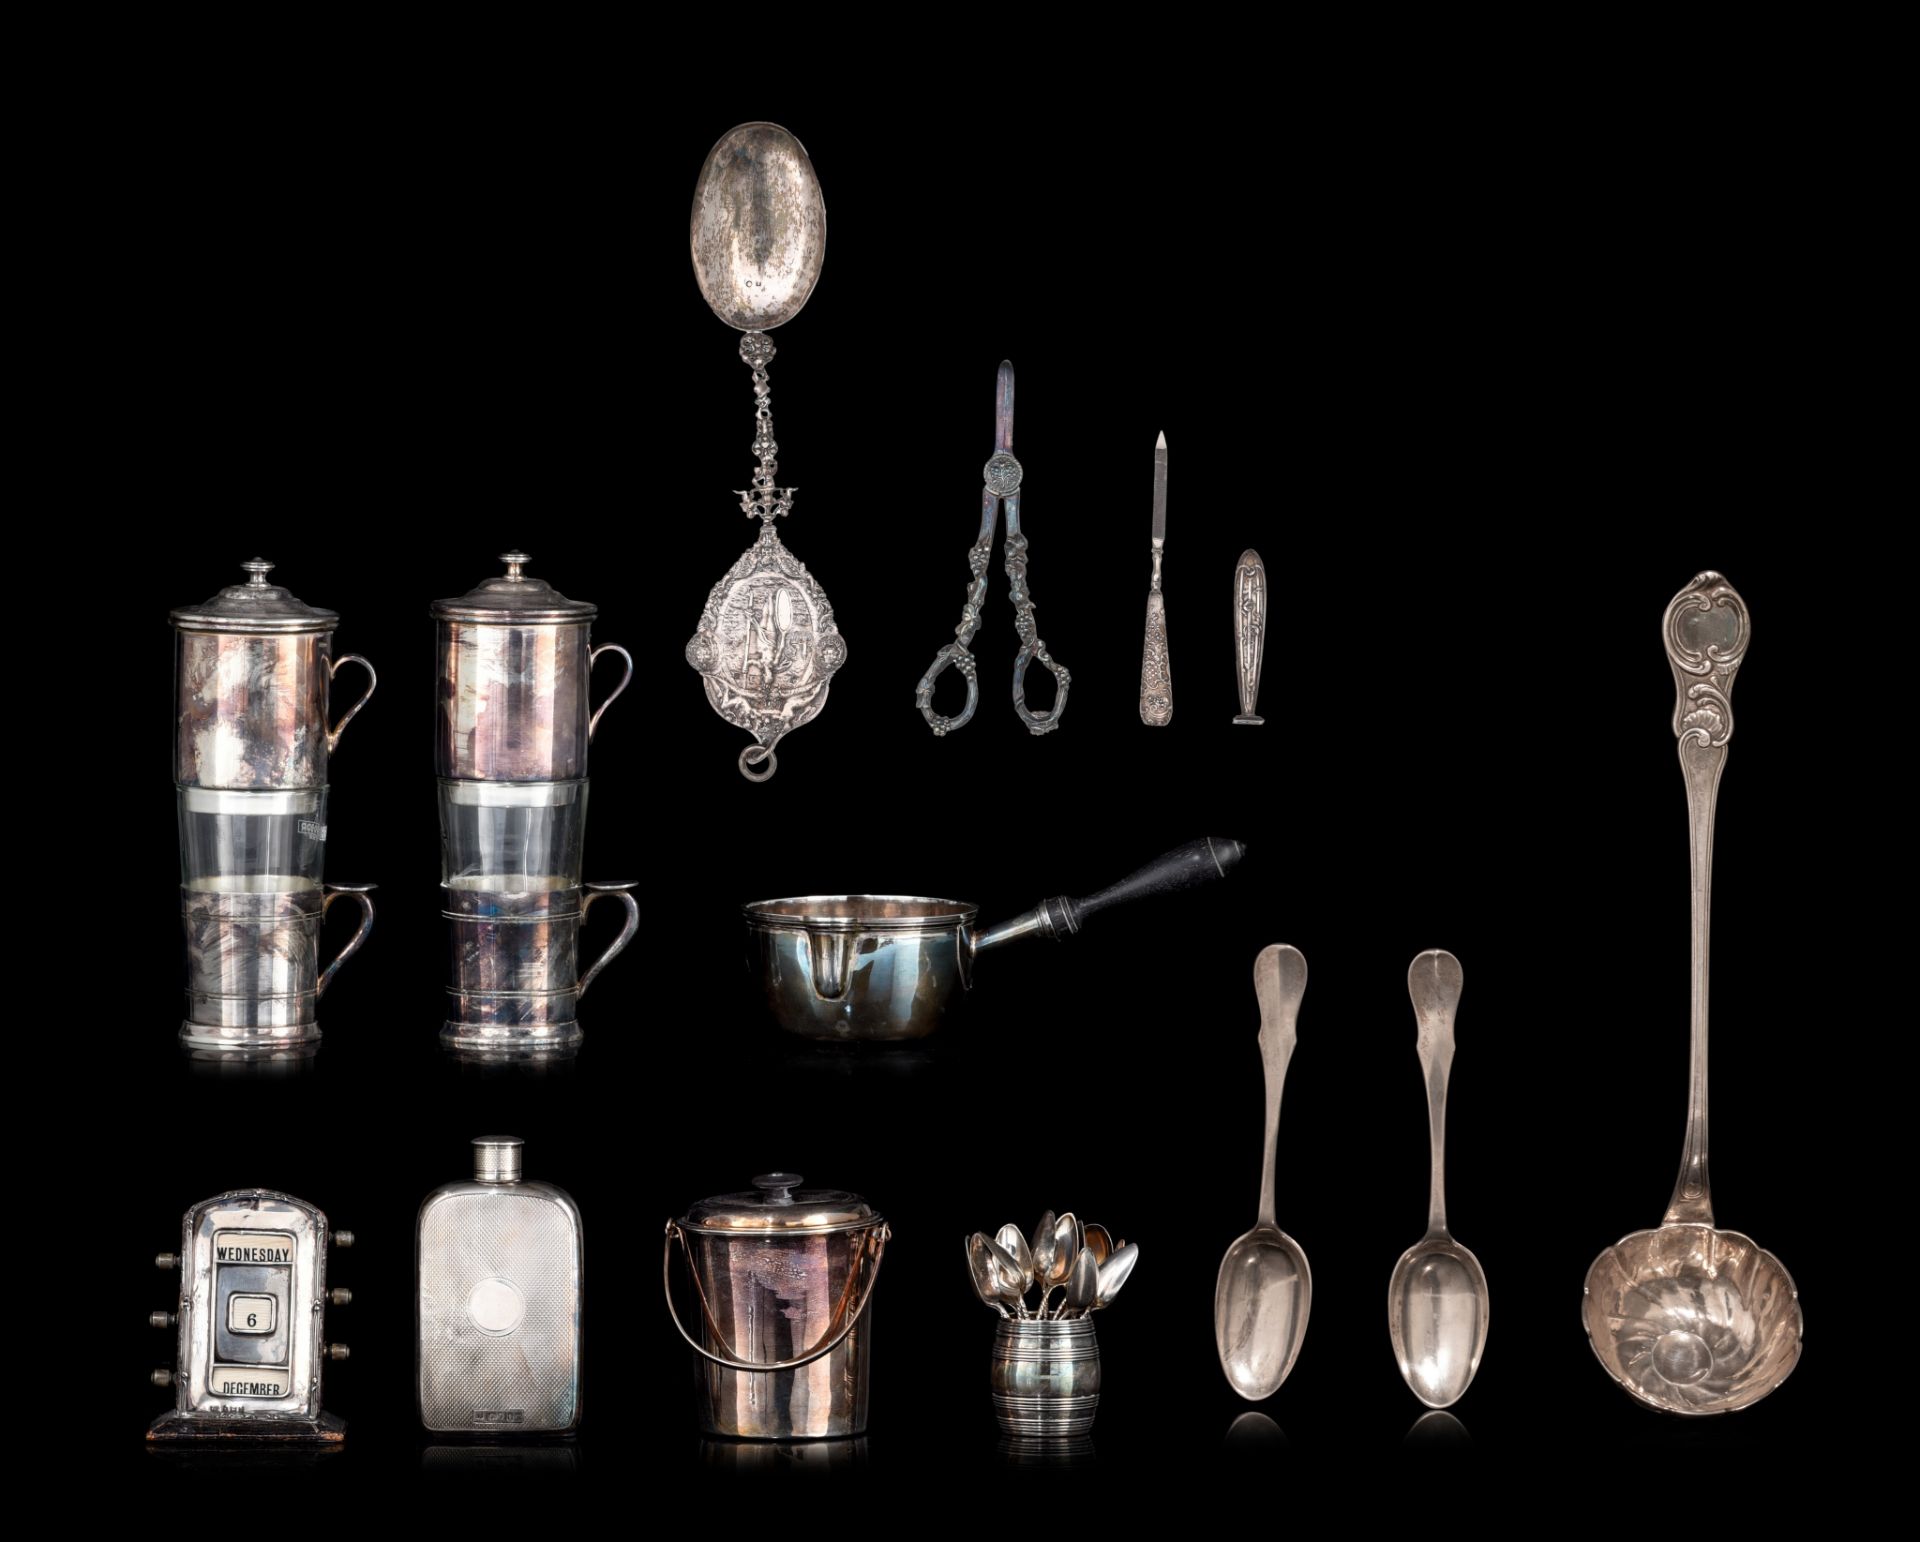 A collection of silver and silvered objects, total weight: 630g, H 5 - 20,5 cm